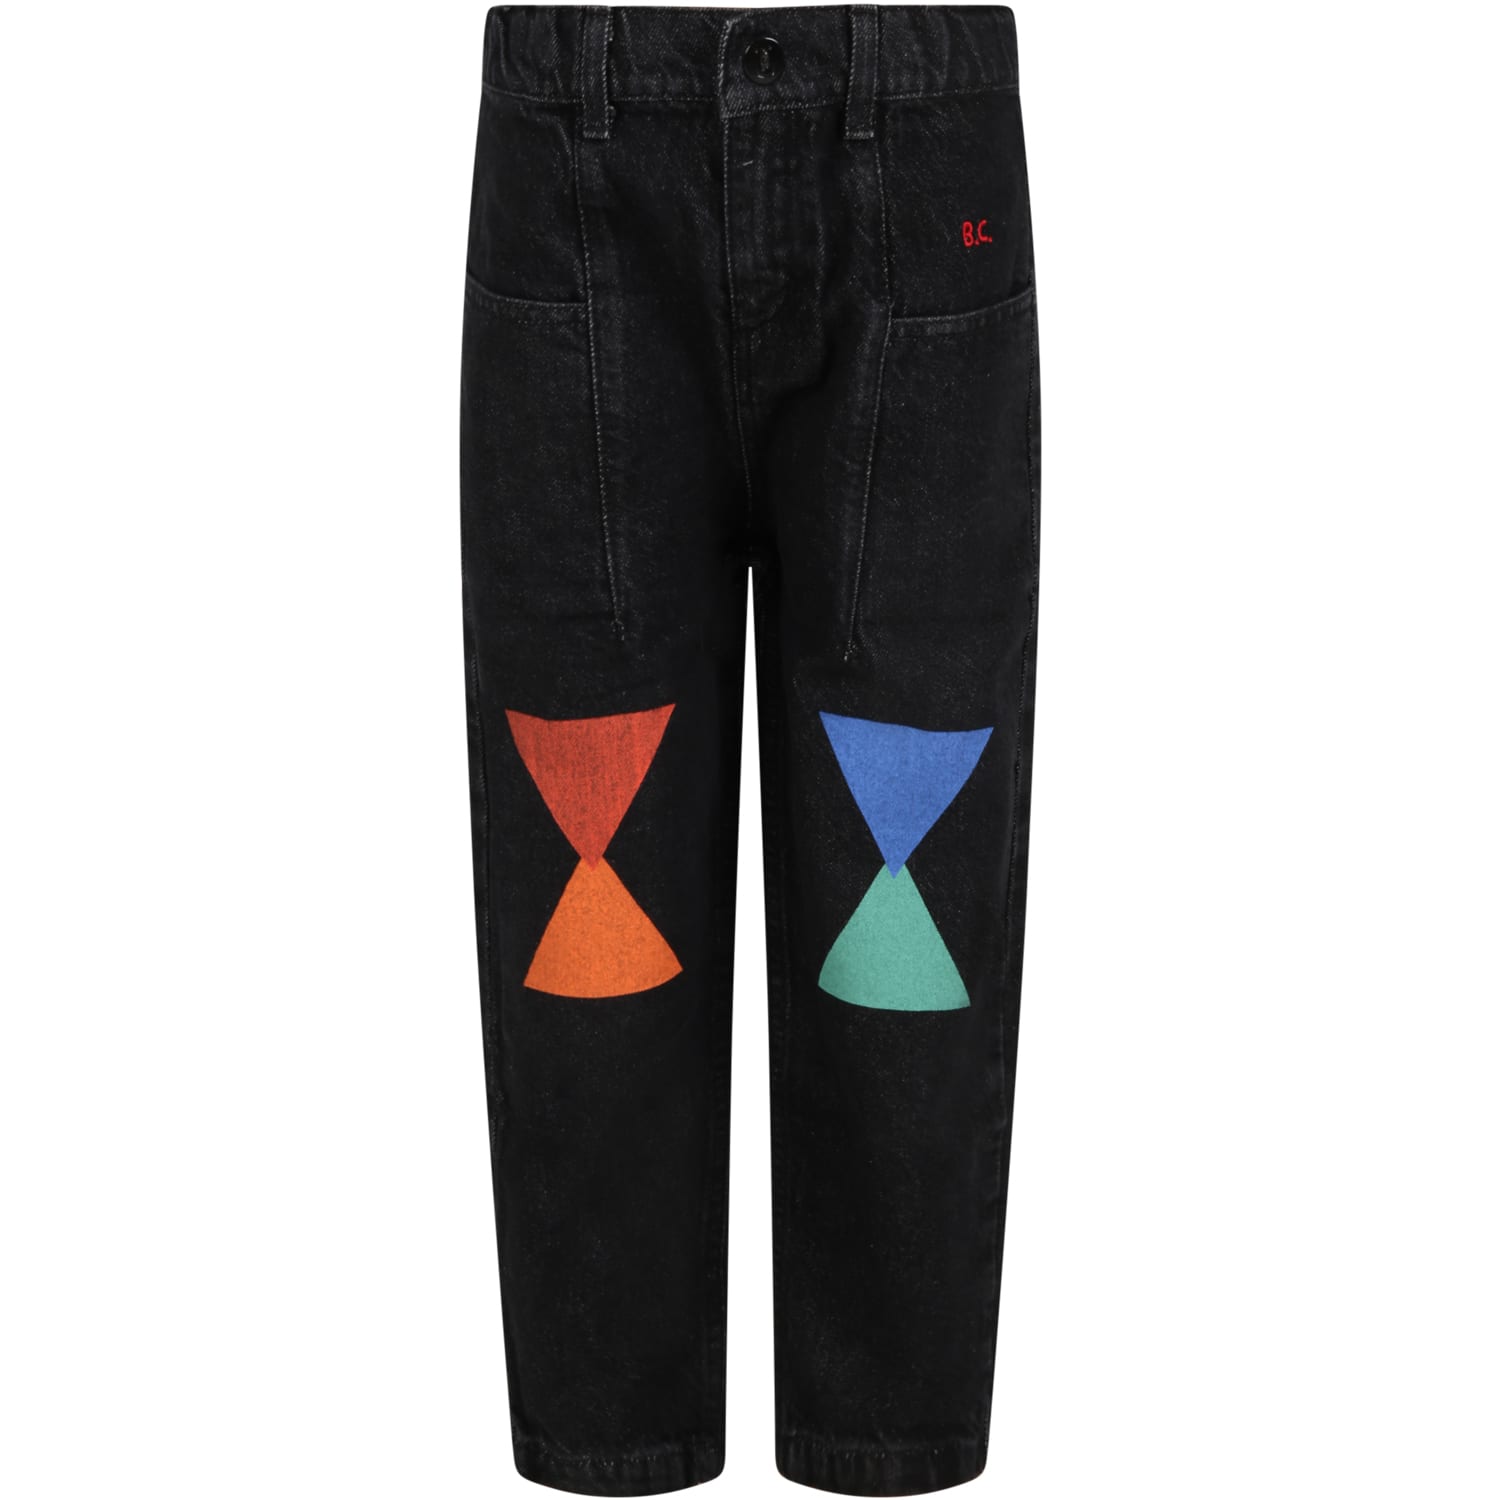 Bobo Choses Black Jeans For Kids With Geometric Designs